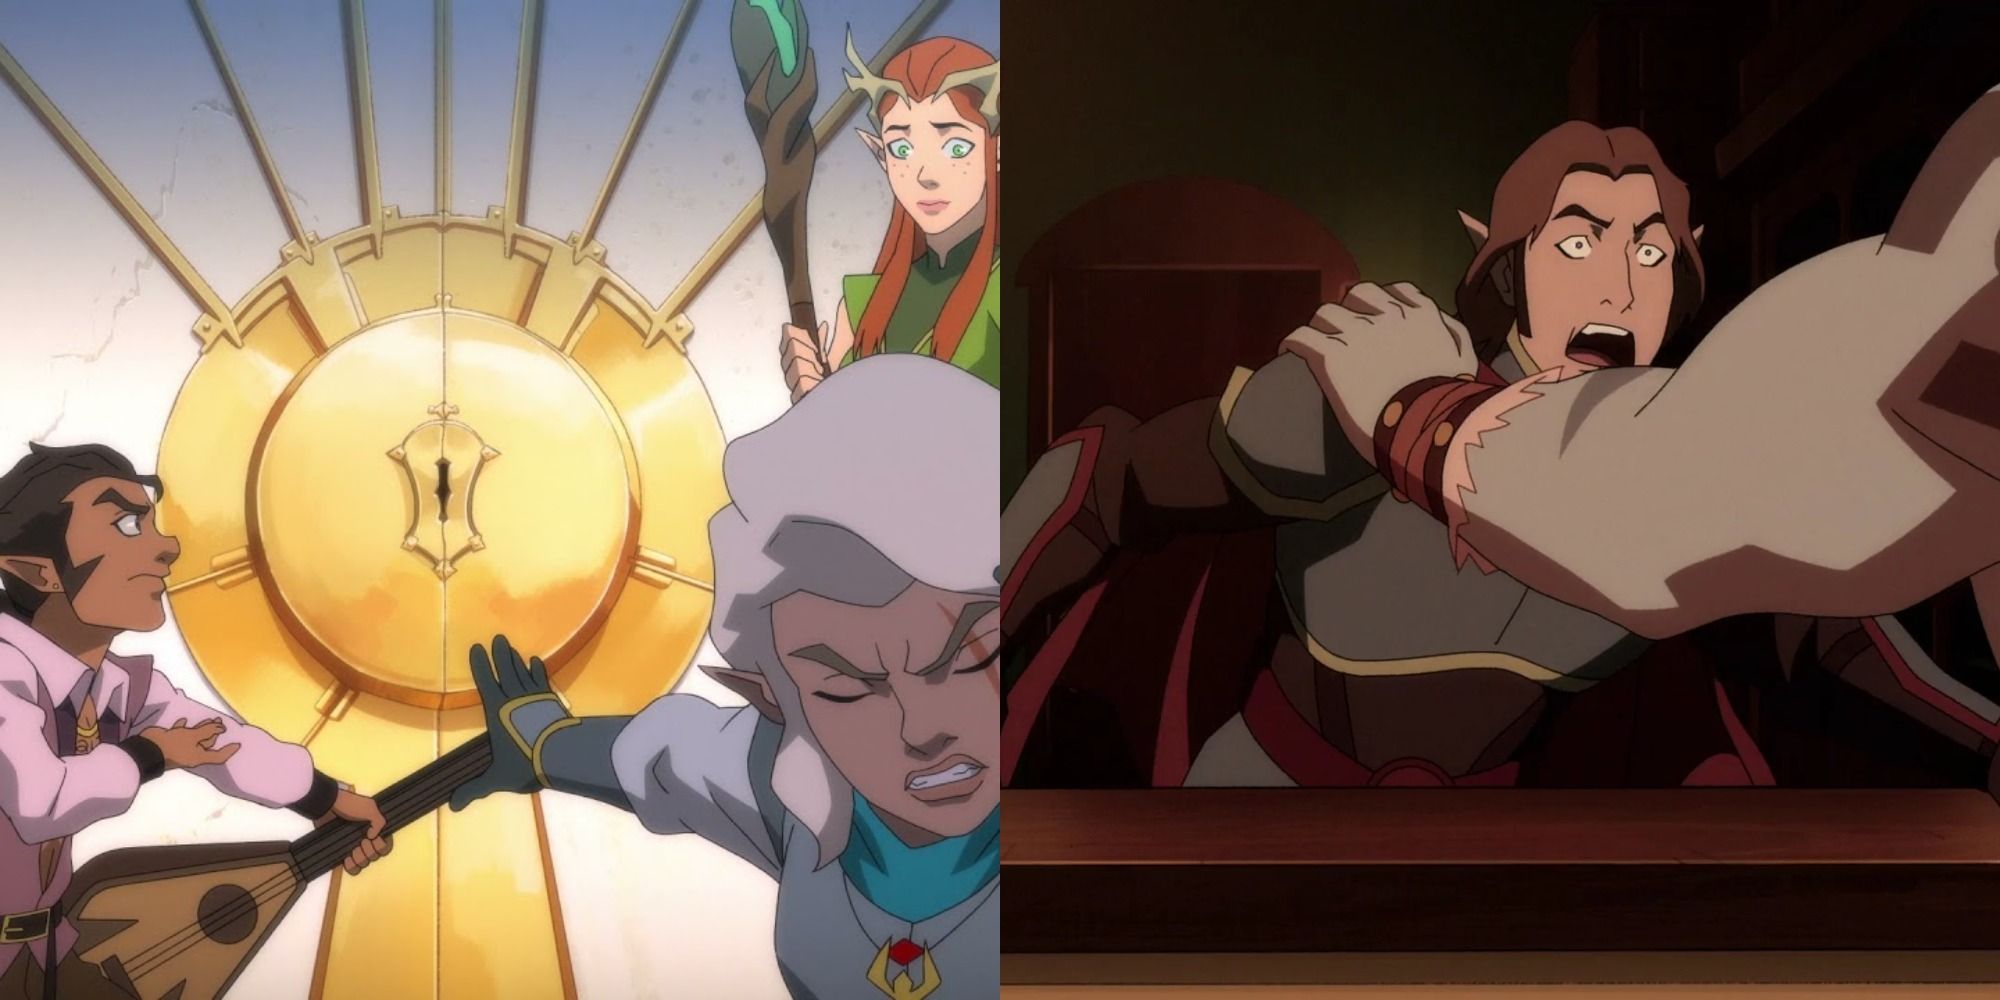 Split image showing characters trying to open a door and another character screaming in The Legend of Vox Machina